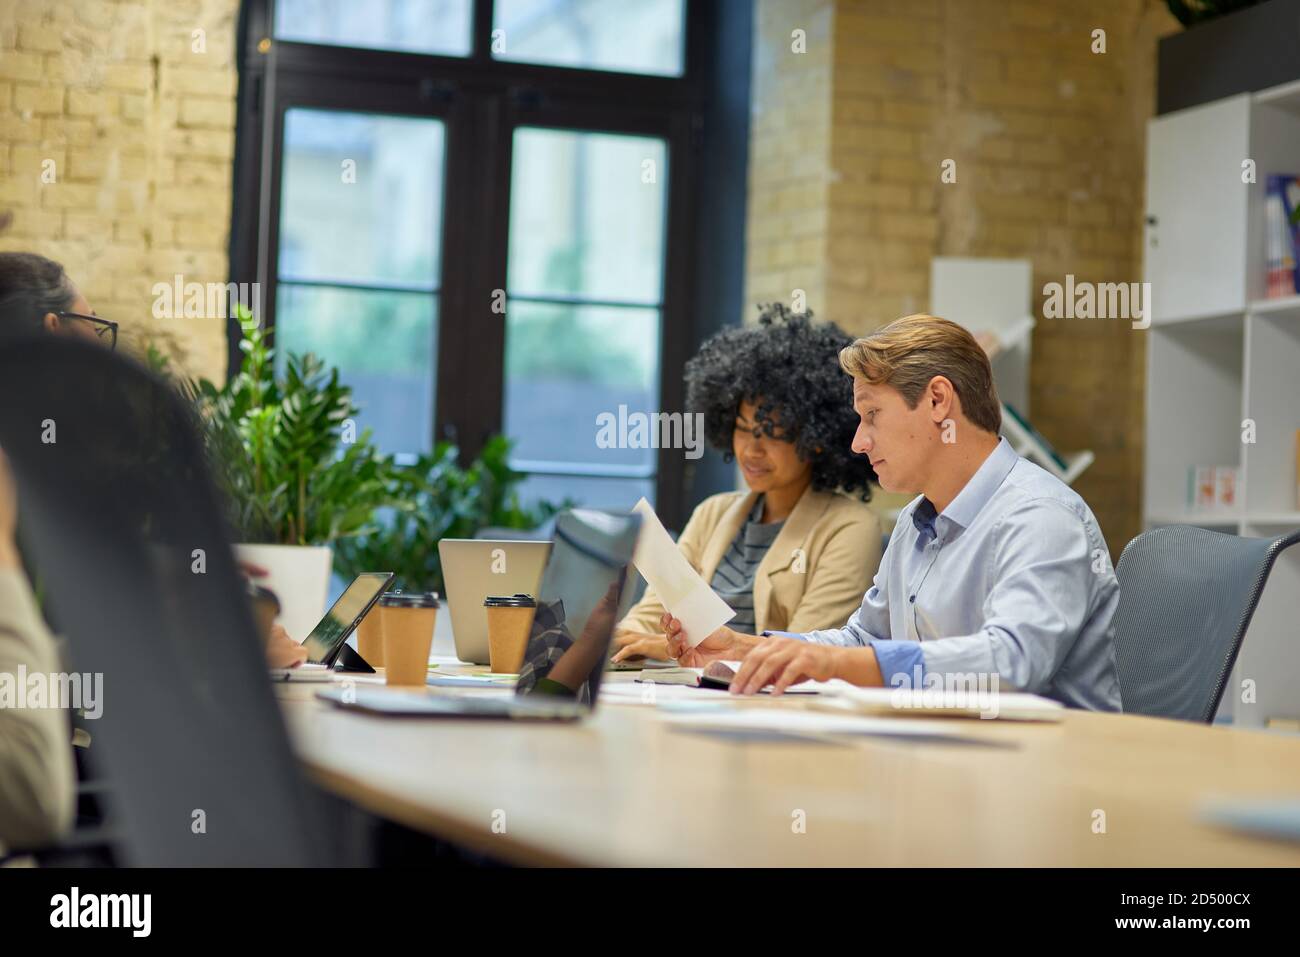 Business people working together. Two male and female coworkers looking at laptop screen and analyzing project results while sitting together at the table in the modern office or coworking space Stock Photo